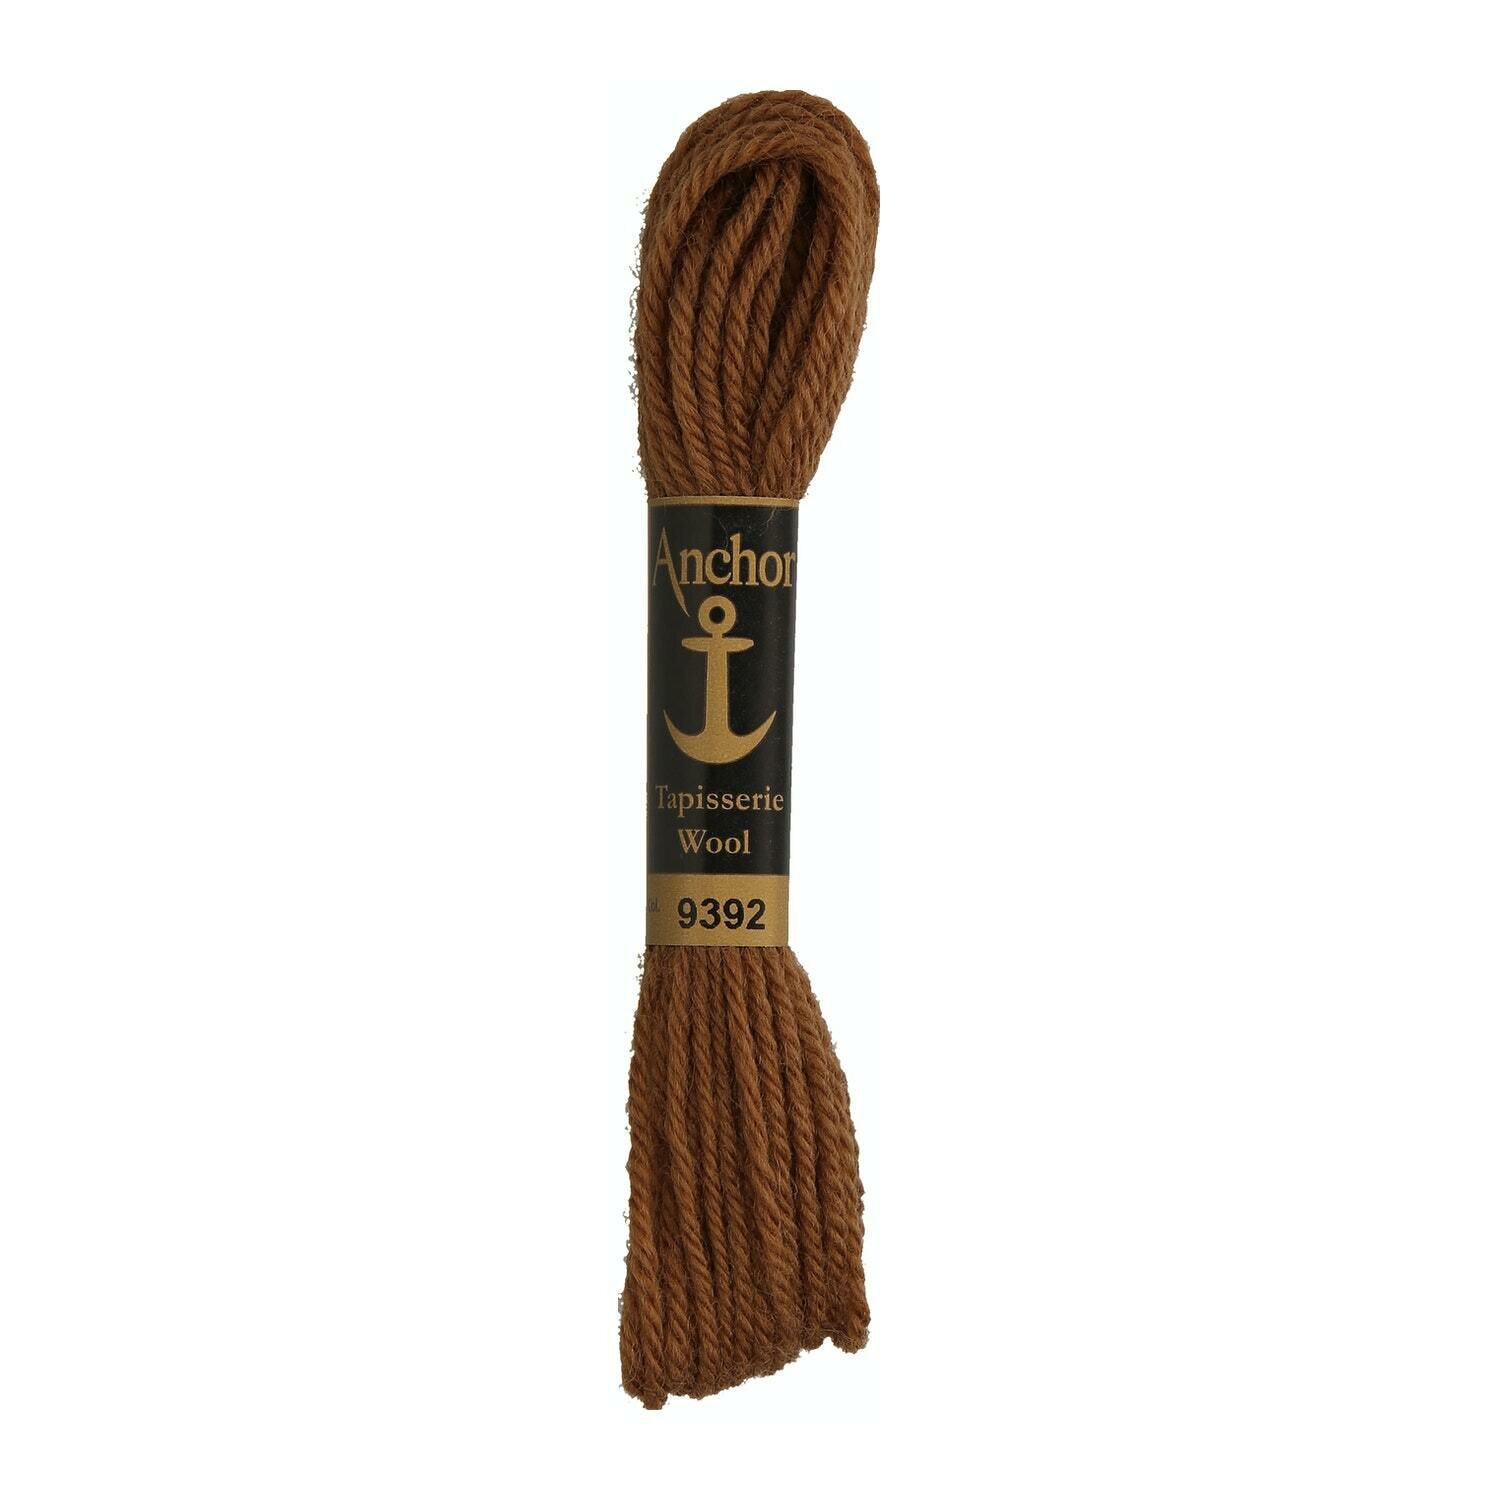 Anchor Tapisserie Wool # 09392